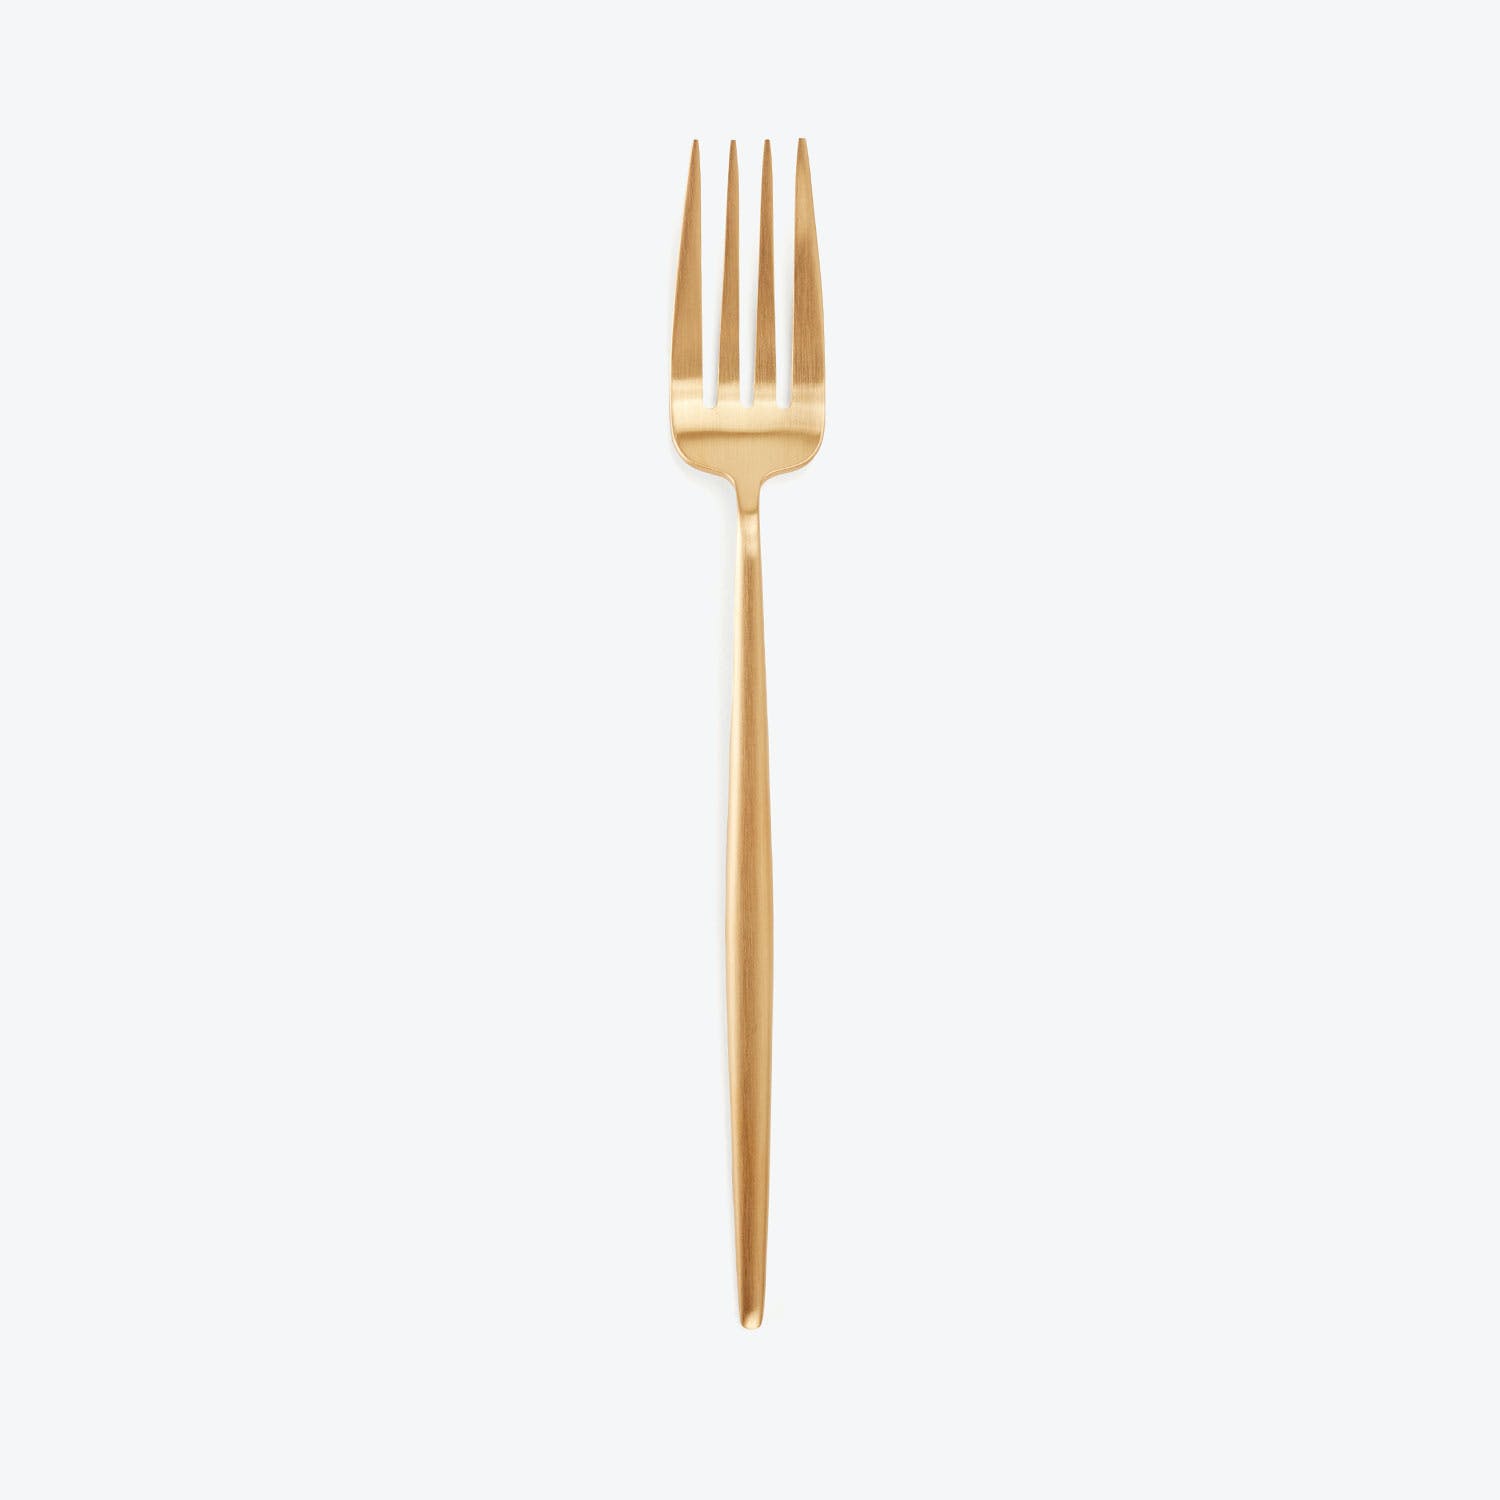 Gold fork with four tines and sleek handle on white background.